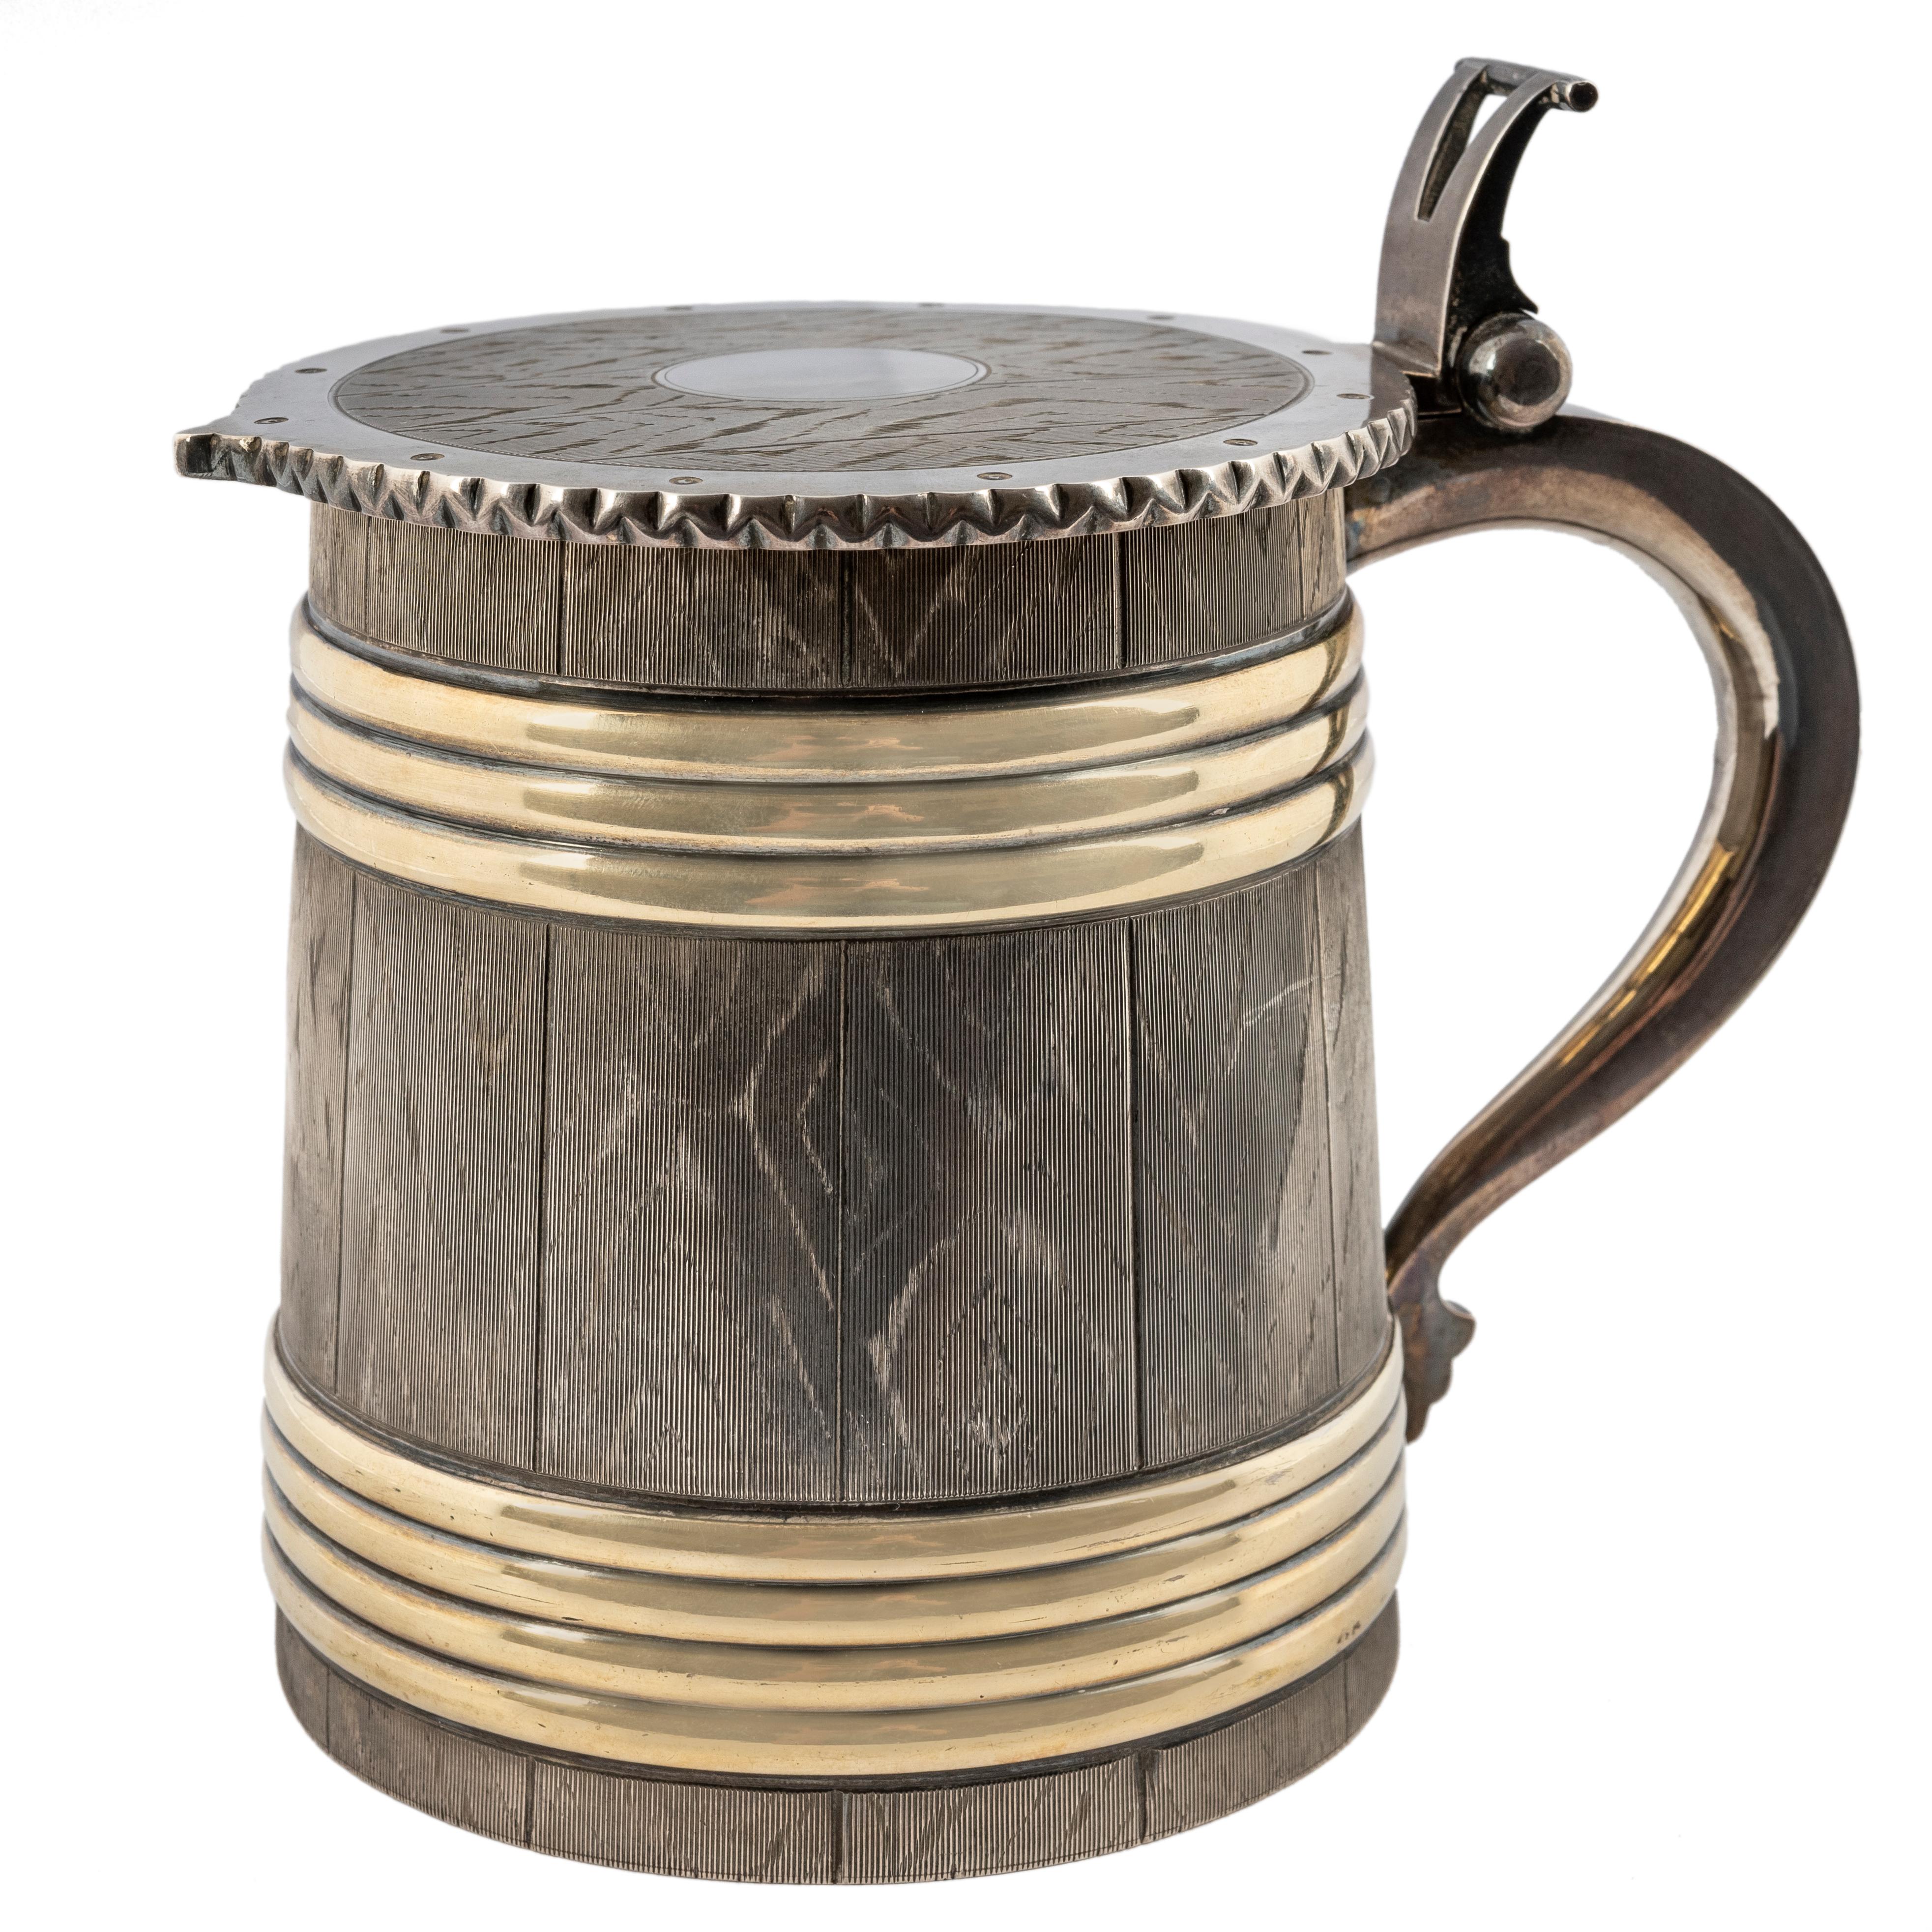 From the Romanov era, period of Tsar Alexander II, the cover and sides of the trompe l'oeil silver tankard chased to simulate oak woodgrain, enhanced with horizontal polished silver gilt bands. The hinged cover has a crenelated edge surrounding a